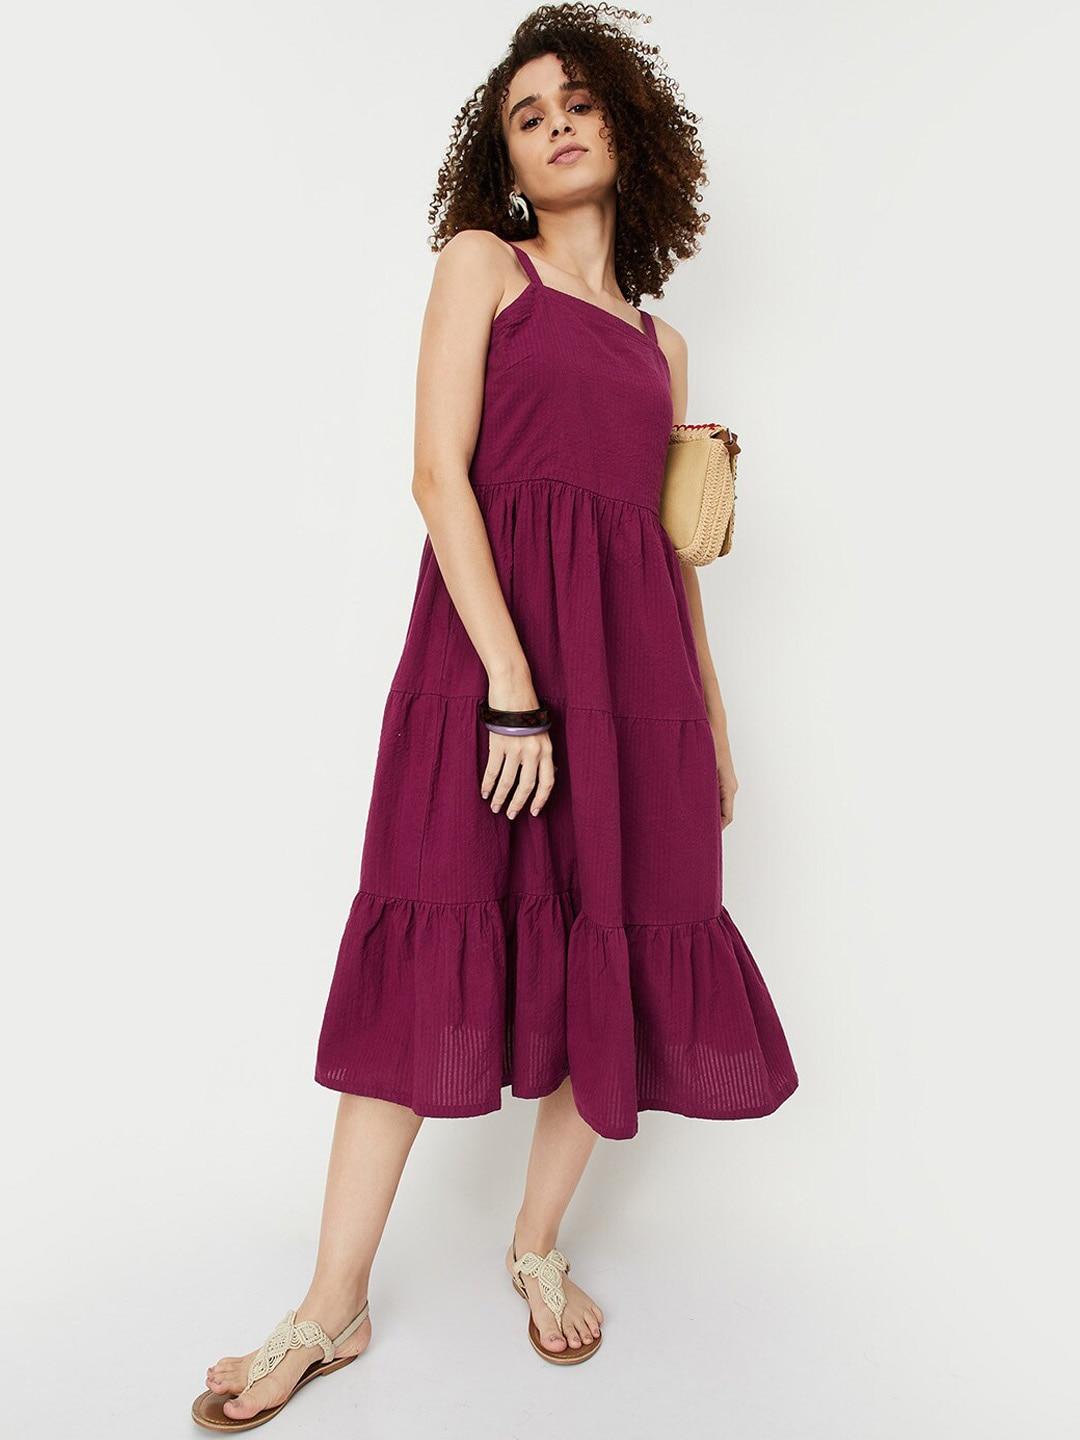 max-shoulder-straps-pure-cotton-fit-and-flared-dress